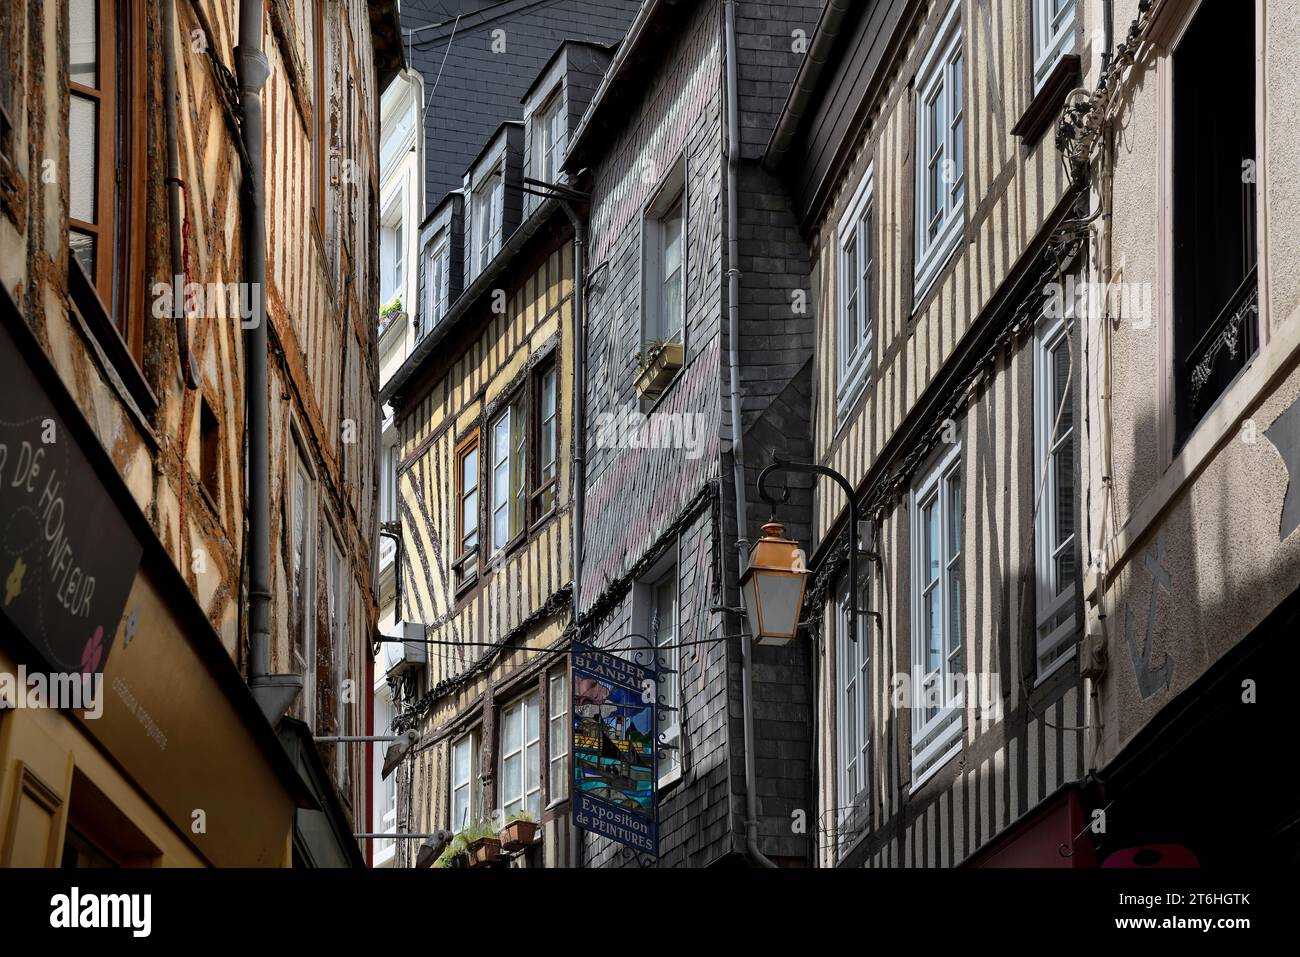 Street of Medieval half-timbered houses with a copper lantern and shop signs, Honfleur, Calvados, Basse Normandie, Normandy, France, Europe Stock Photo